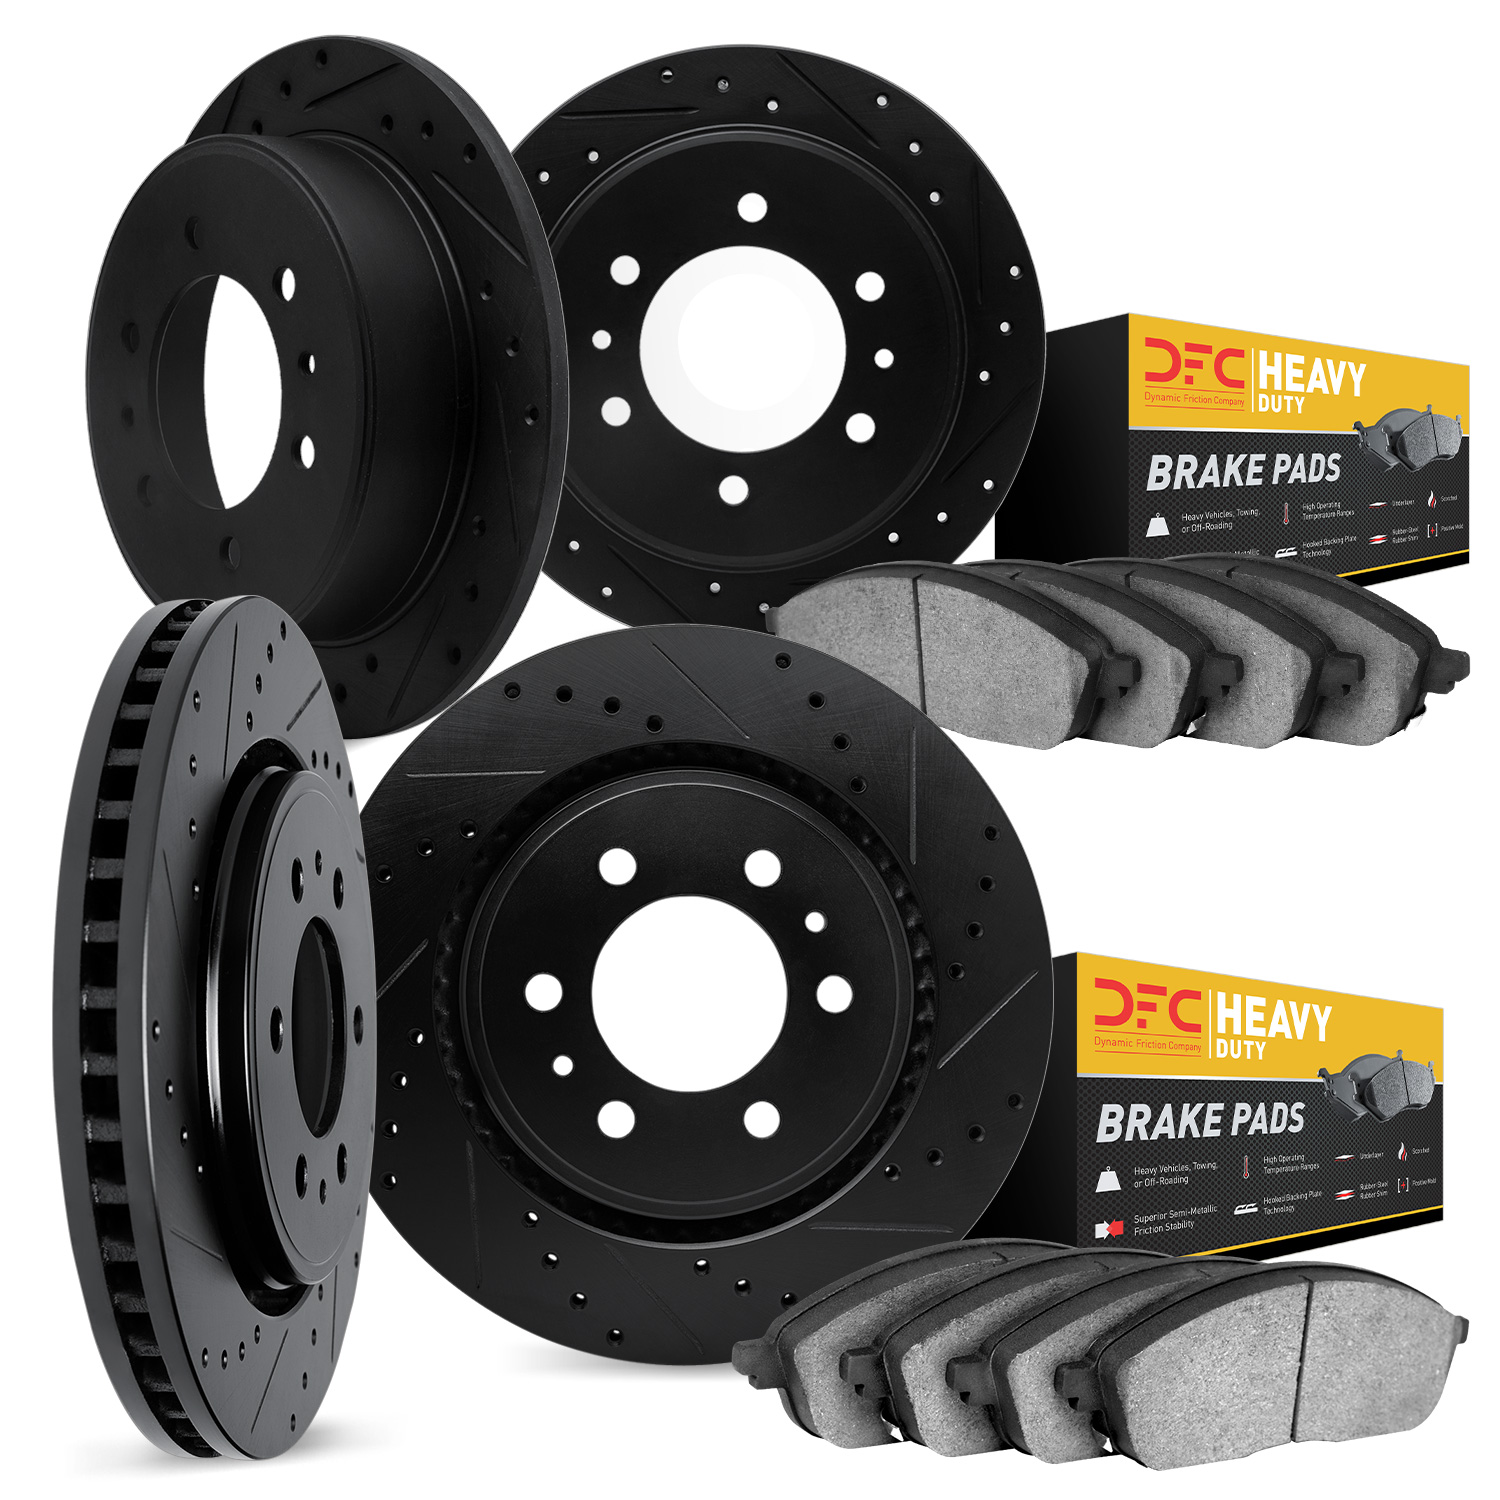 7204-40217 Drilled/Slotted Rotors w/Heavy-Duty Brake Pads Kit [Silver], Fits Select Multiple Makes/Models, Position: Front and R